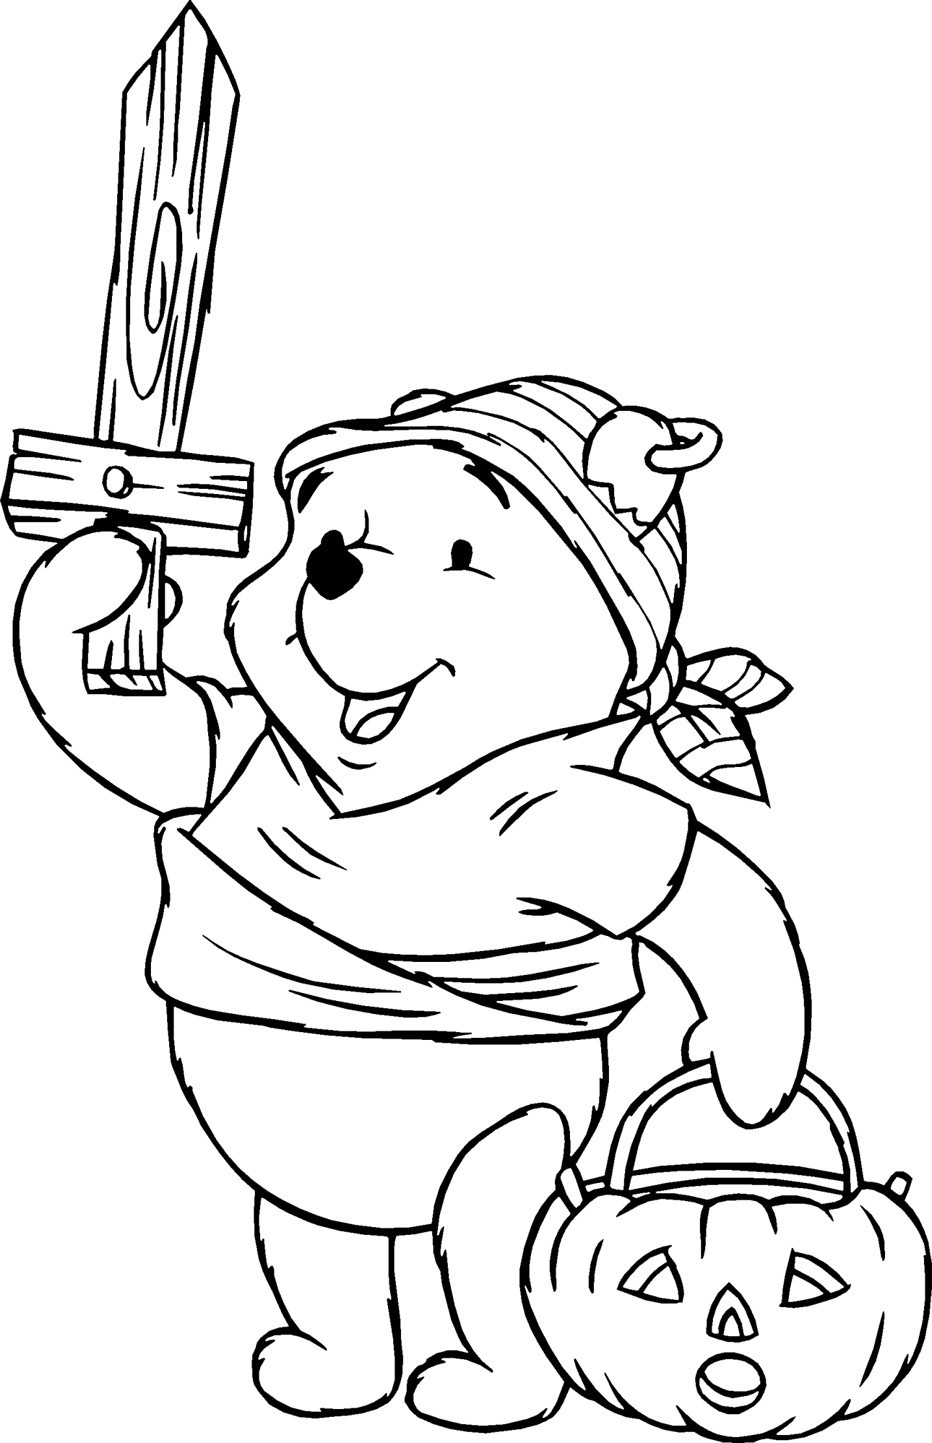 Disney Coloring Pages For Kids To Print Out
 24 Free Printable Halloween Coloring Pages for Kids